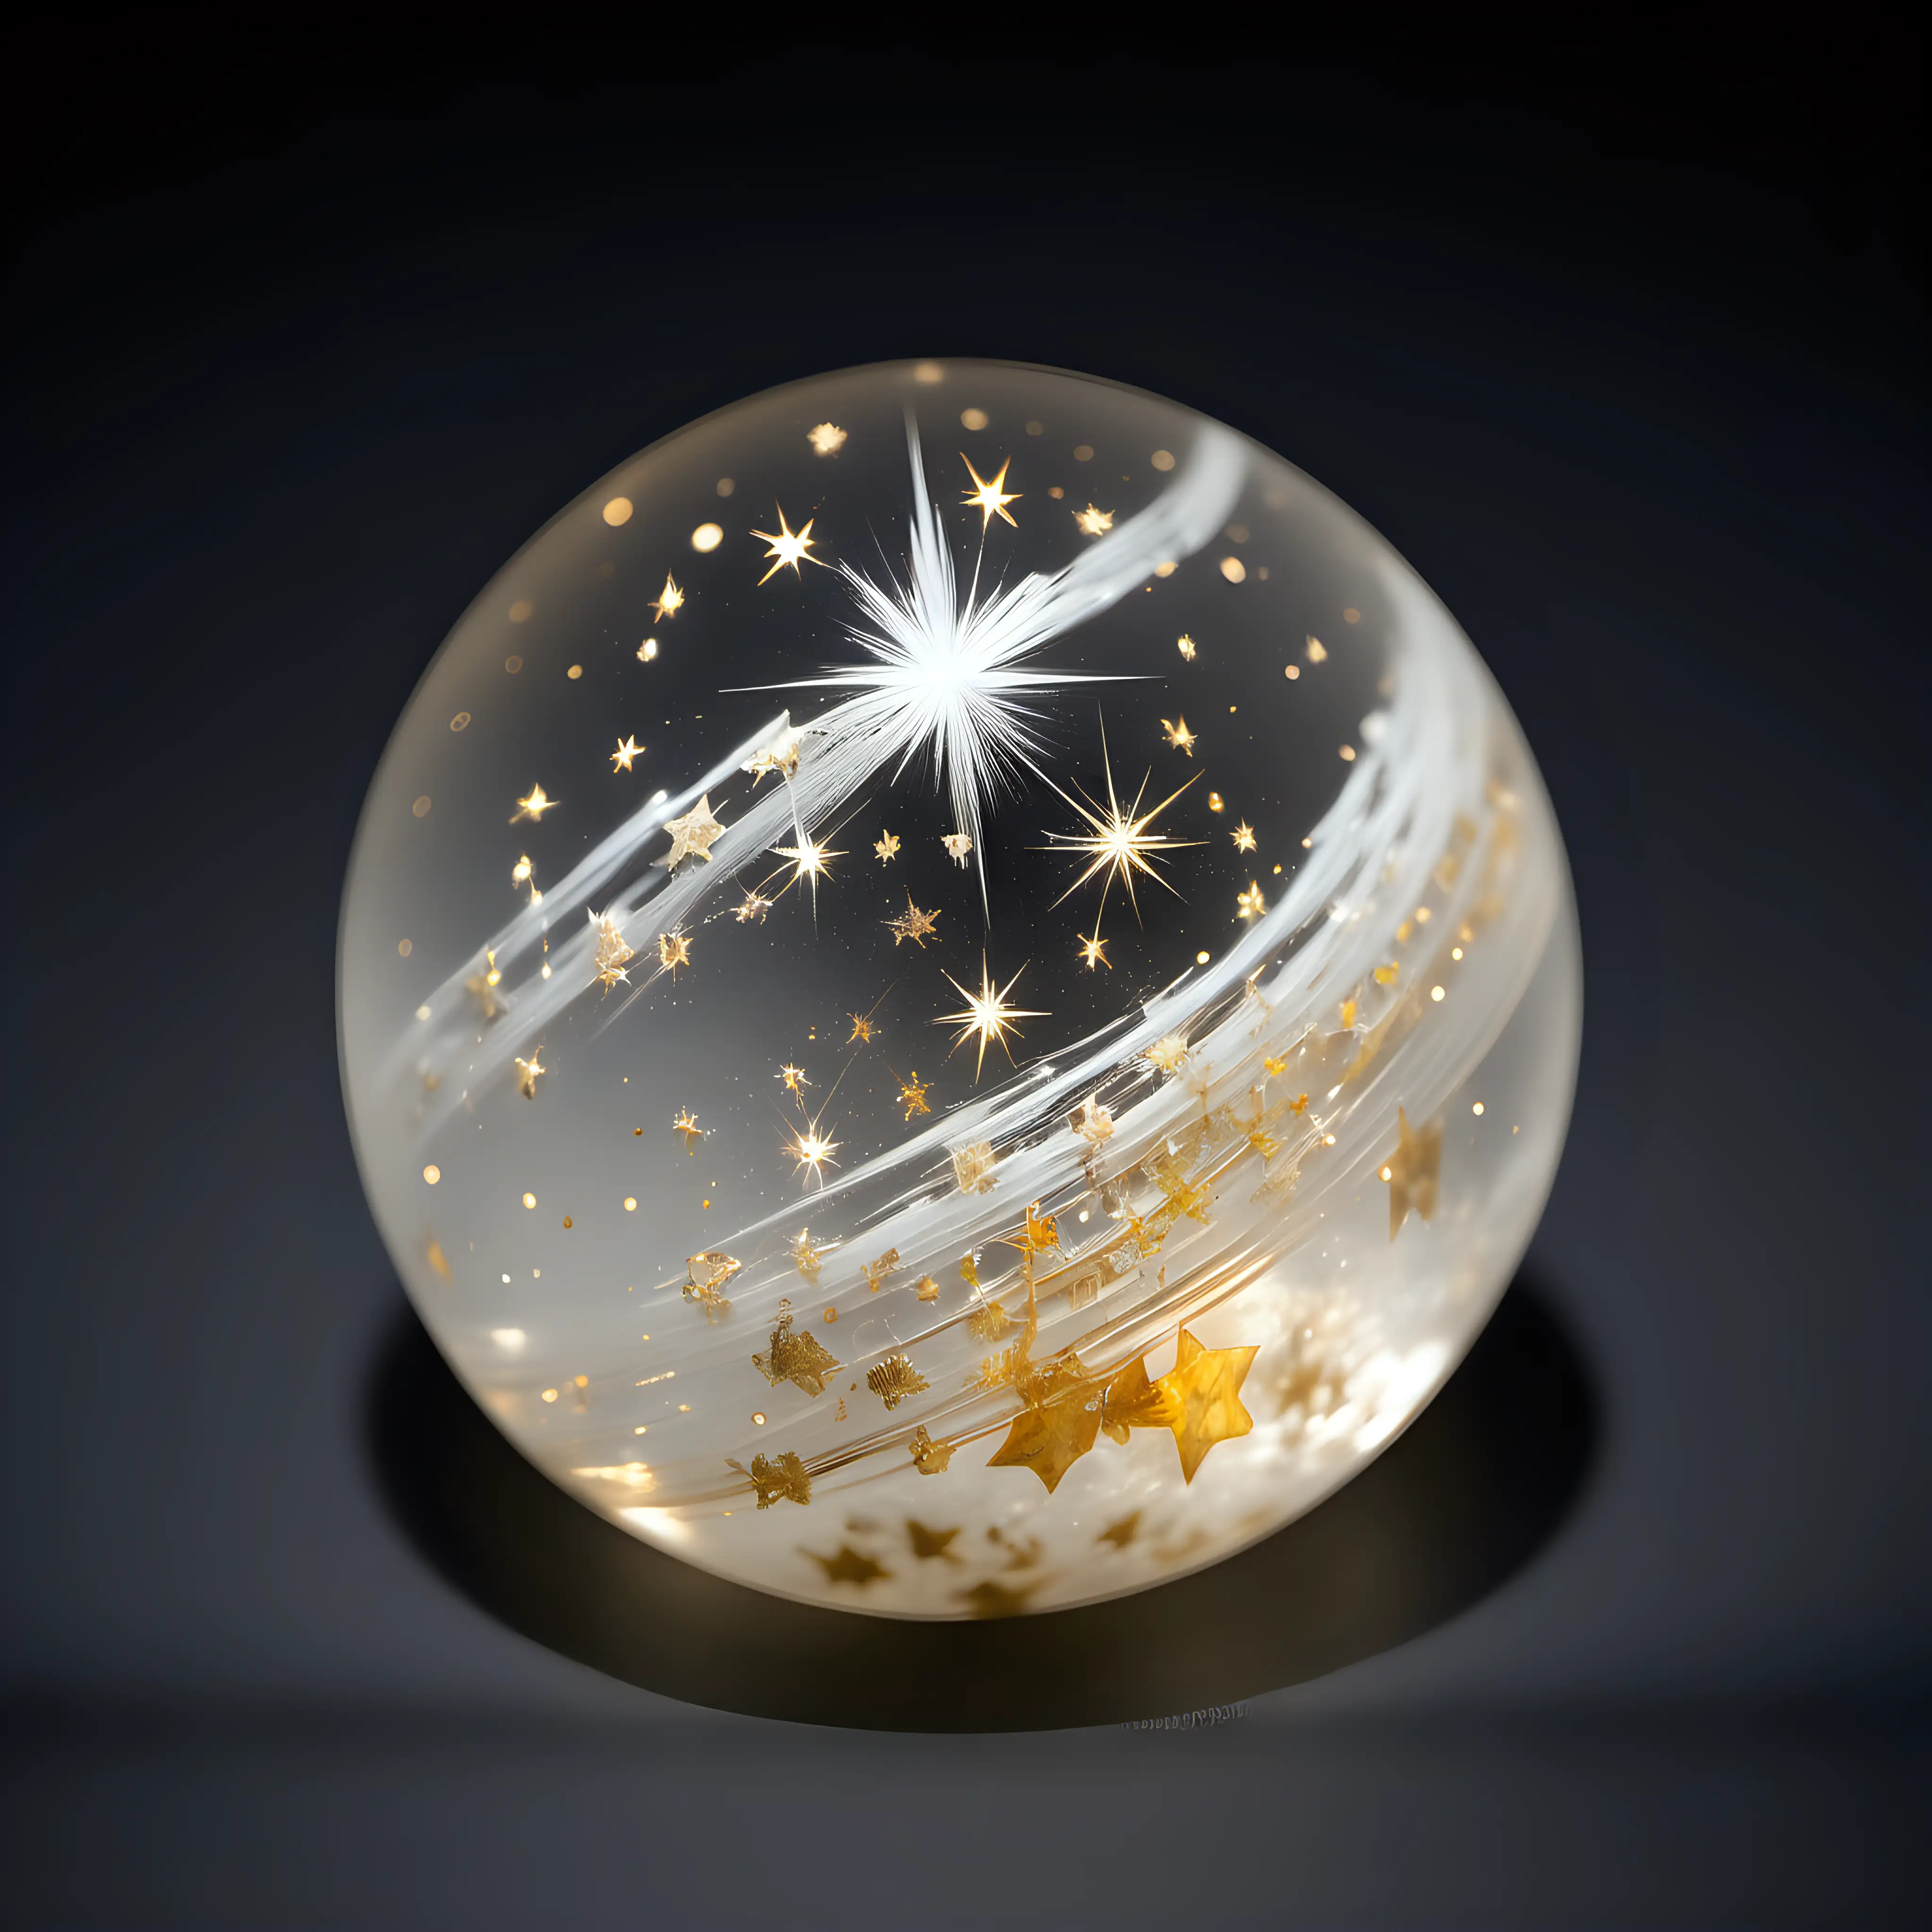 A small, perfectly round, almost transparent golden-white stone with streaks of tiny stars that flicker like snow.